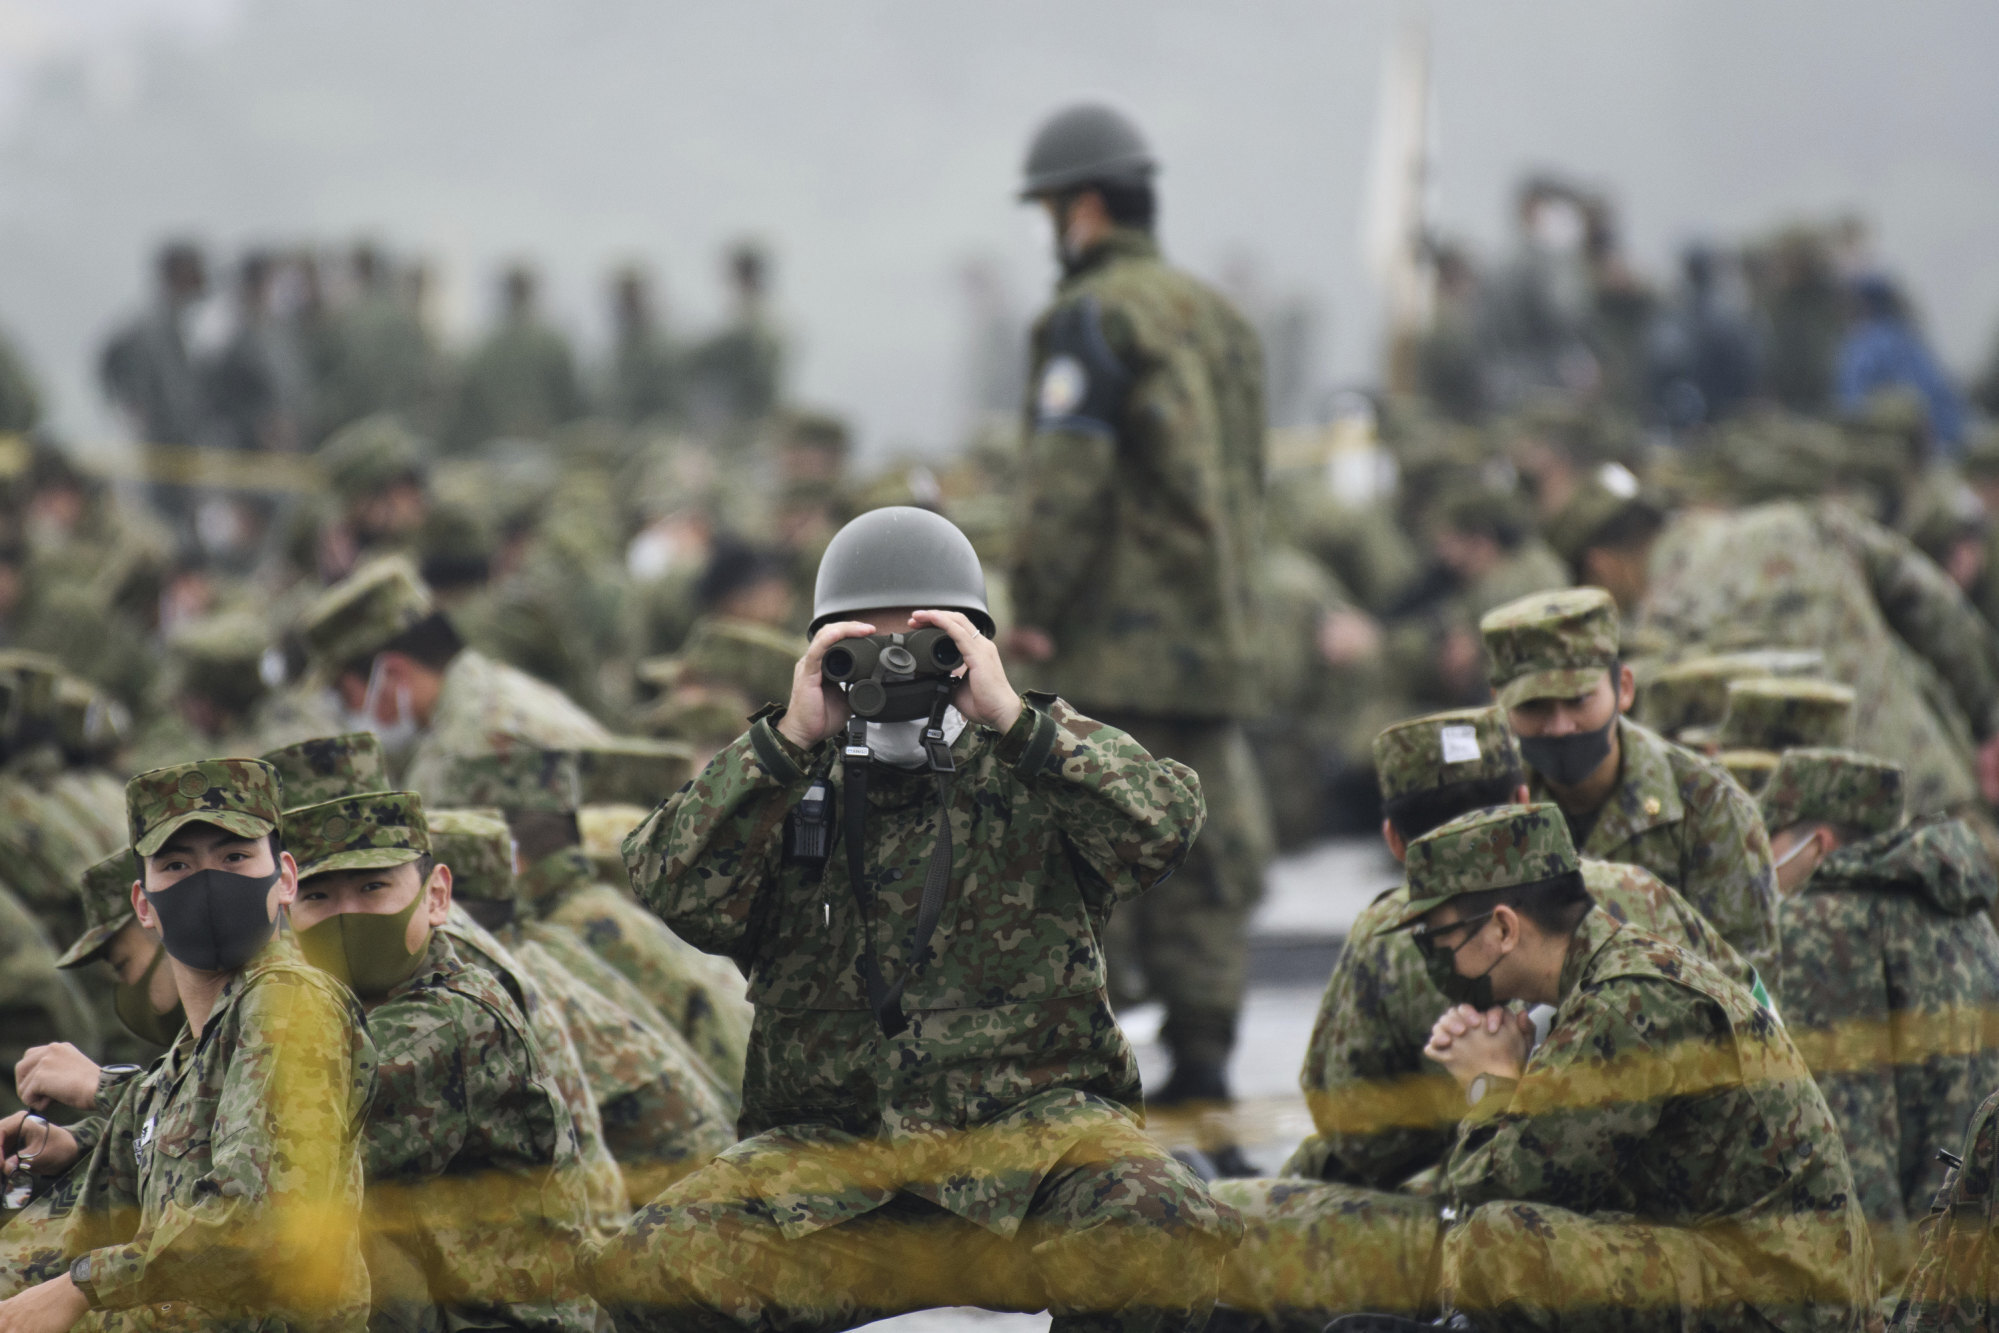 Japan Ground Self-Defense Force soldiers take part in a live fire exercise in Gotemba, southwest of Tokyo. Photo: AP